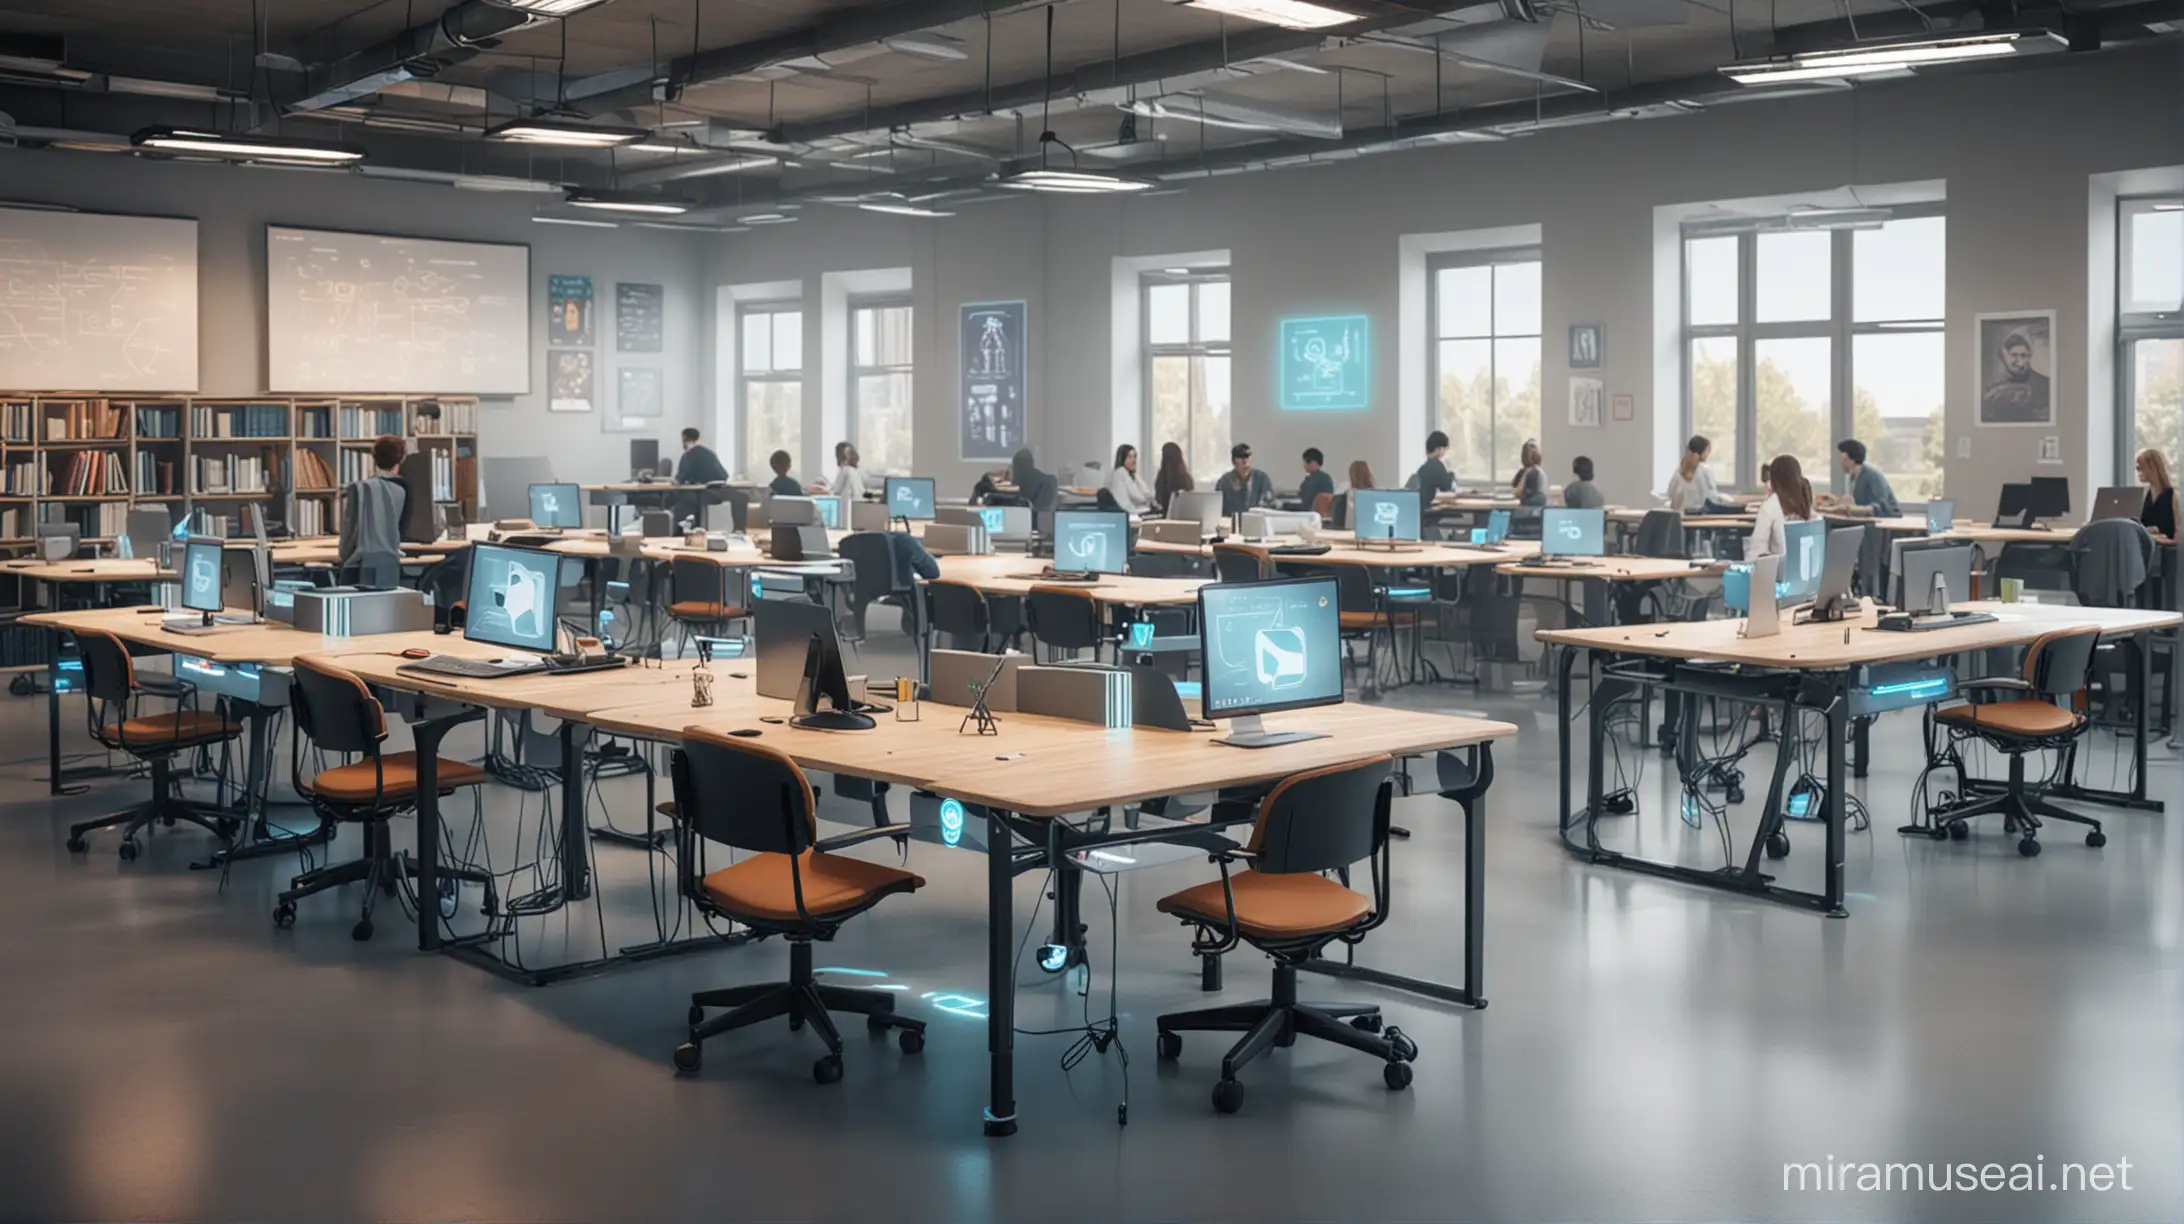 Futuristic University Students and Teachers Engage with AI Technology in Modular Classroom